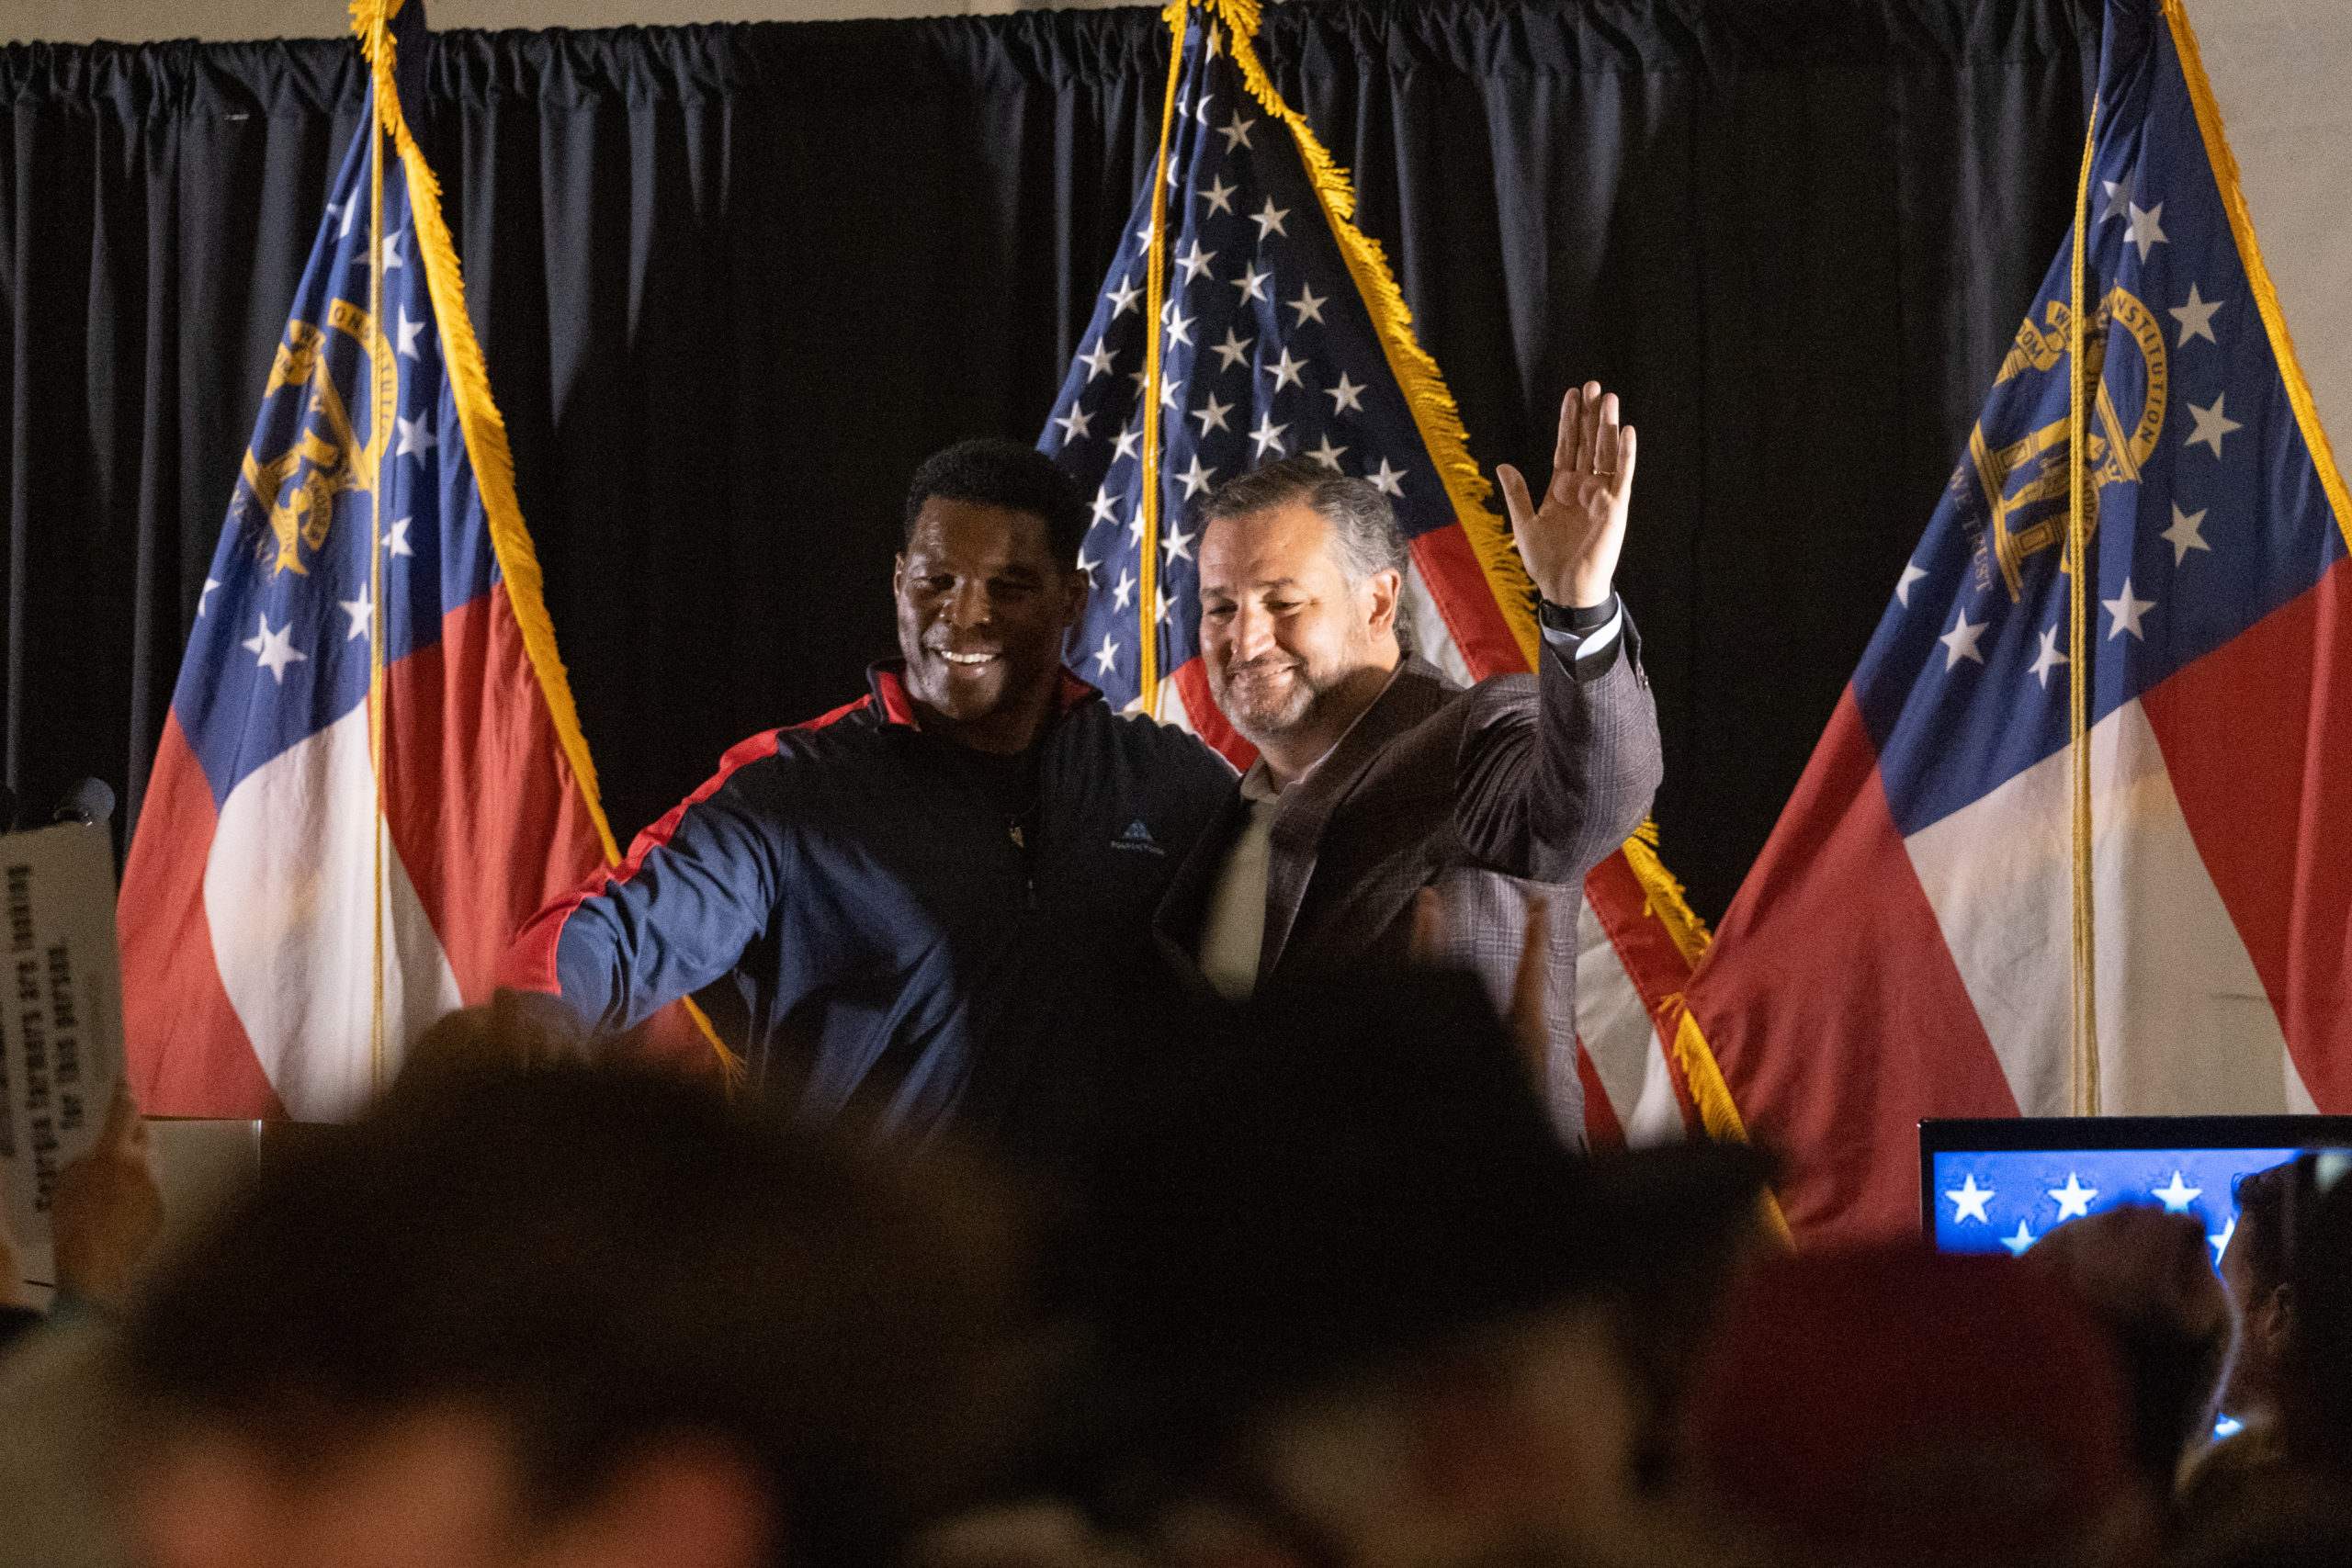  U.S. Sen. Ted Cruz (R-TX) (R) campaigns for Republican Senate candidate Herschel Walker at a rally at The Mill on Etowahon November 10, 2022 in Canton, Georgia. The University of Georgia 1982 Heisman Trophy winner and former NFL running back faces incumbent Sen. Raphael Warnock (D-GA) in a runoff on December 6. (Photo by Megan Varner/Getty Images)